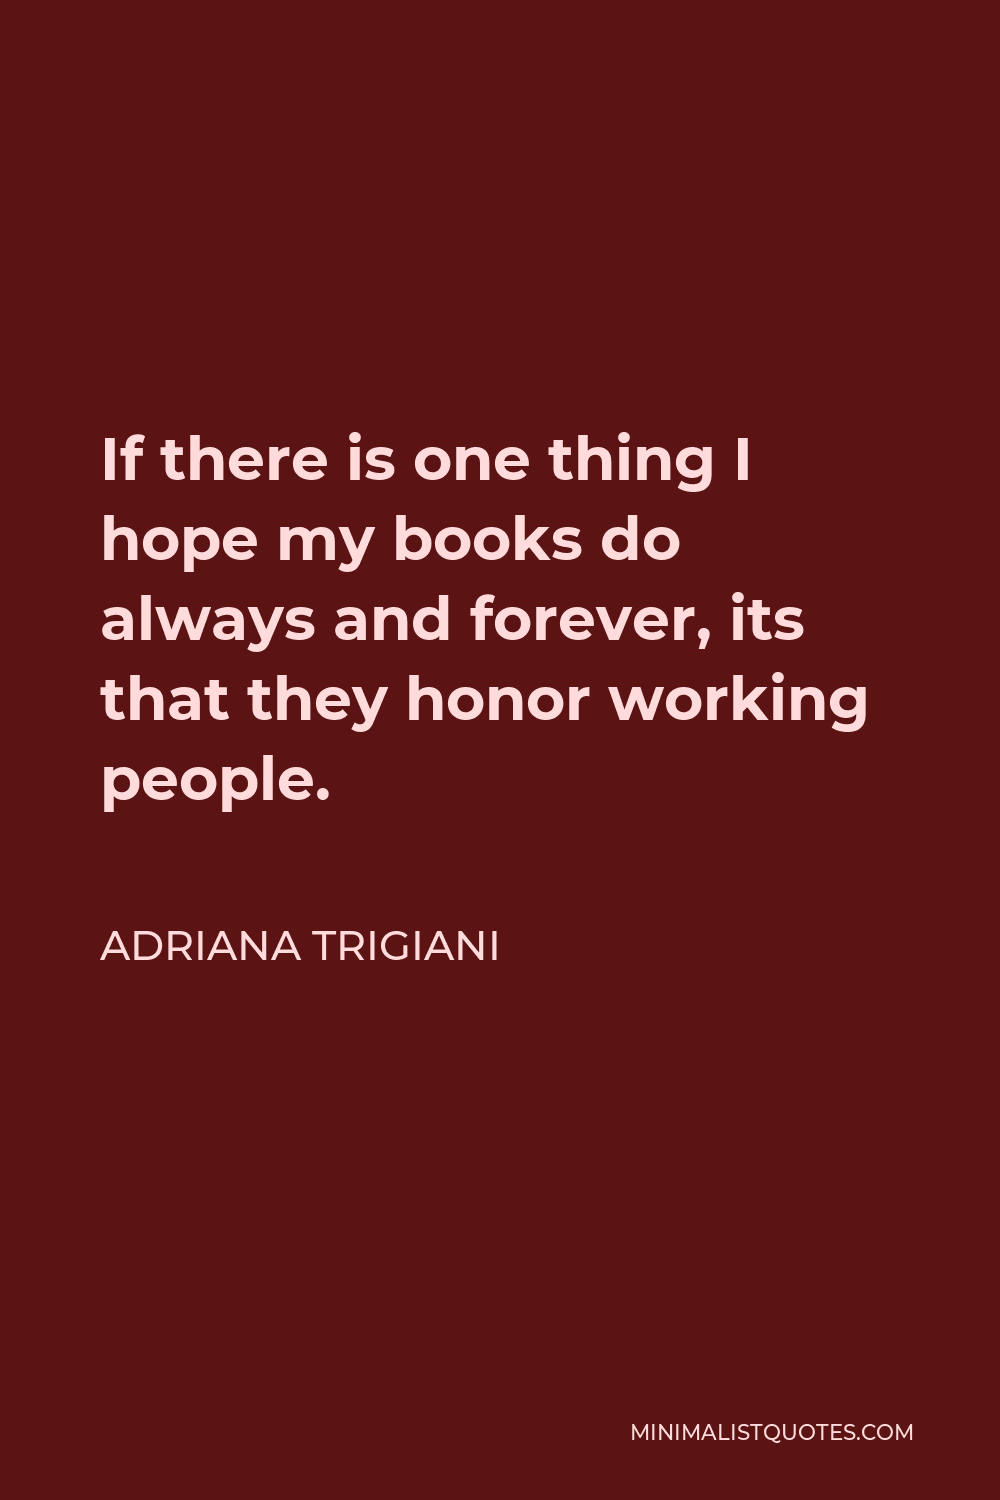 Adriana Trigiani Quote - If there is one thing I hope my books do always and forever, its that they honor working people.